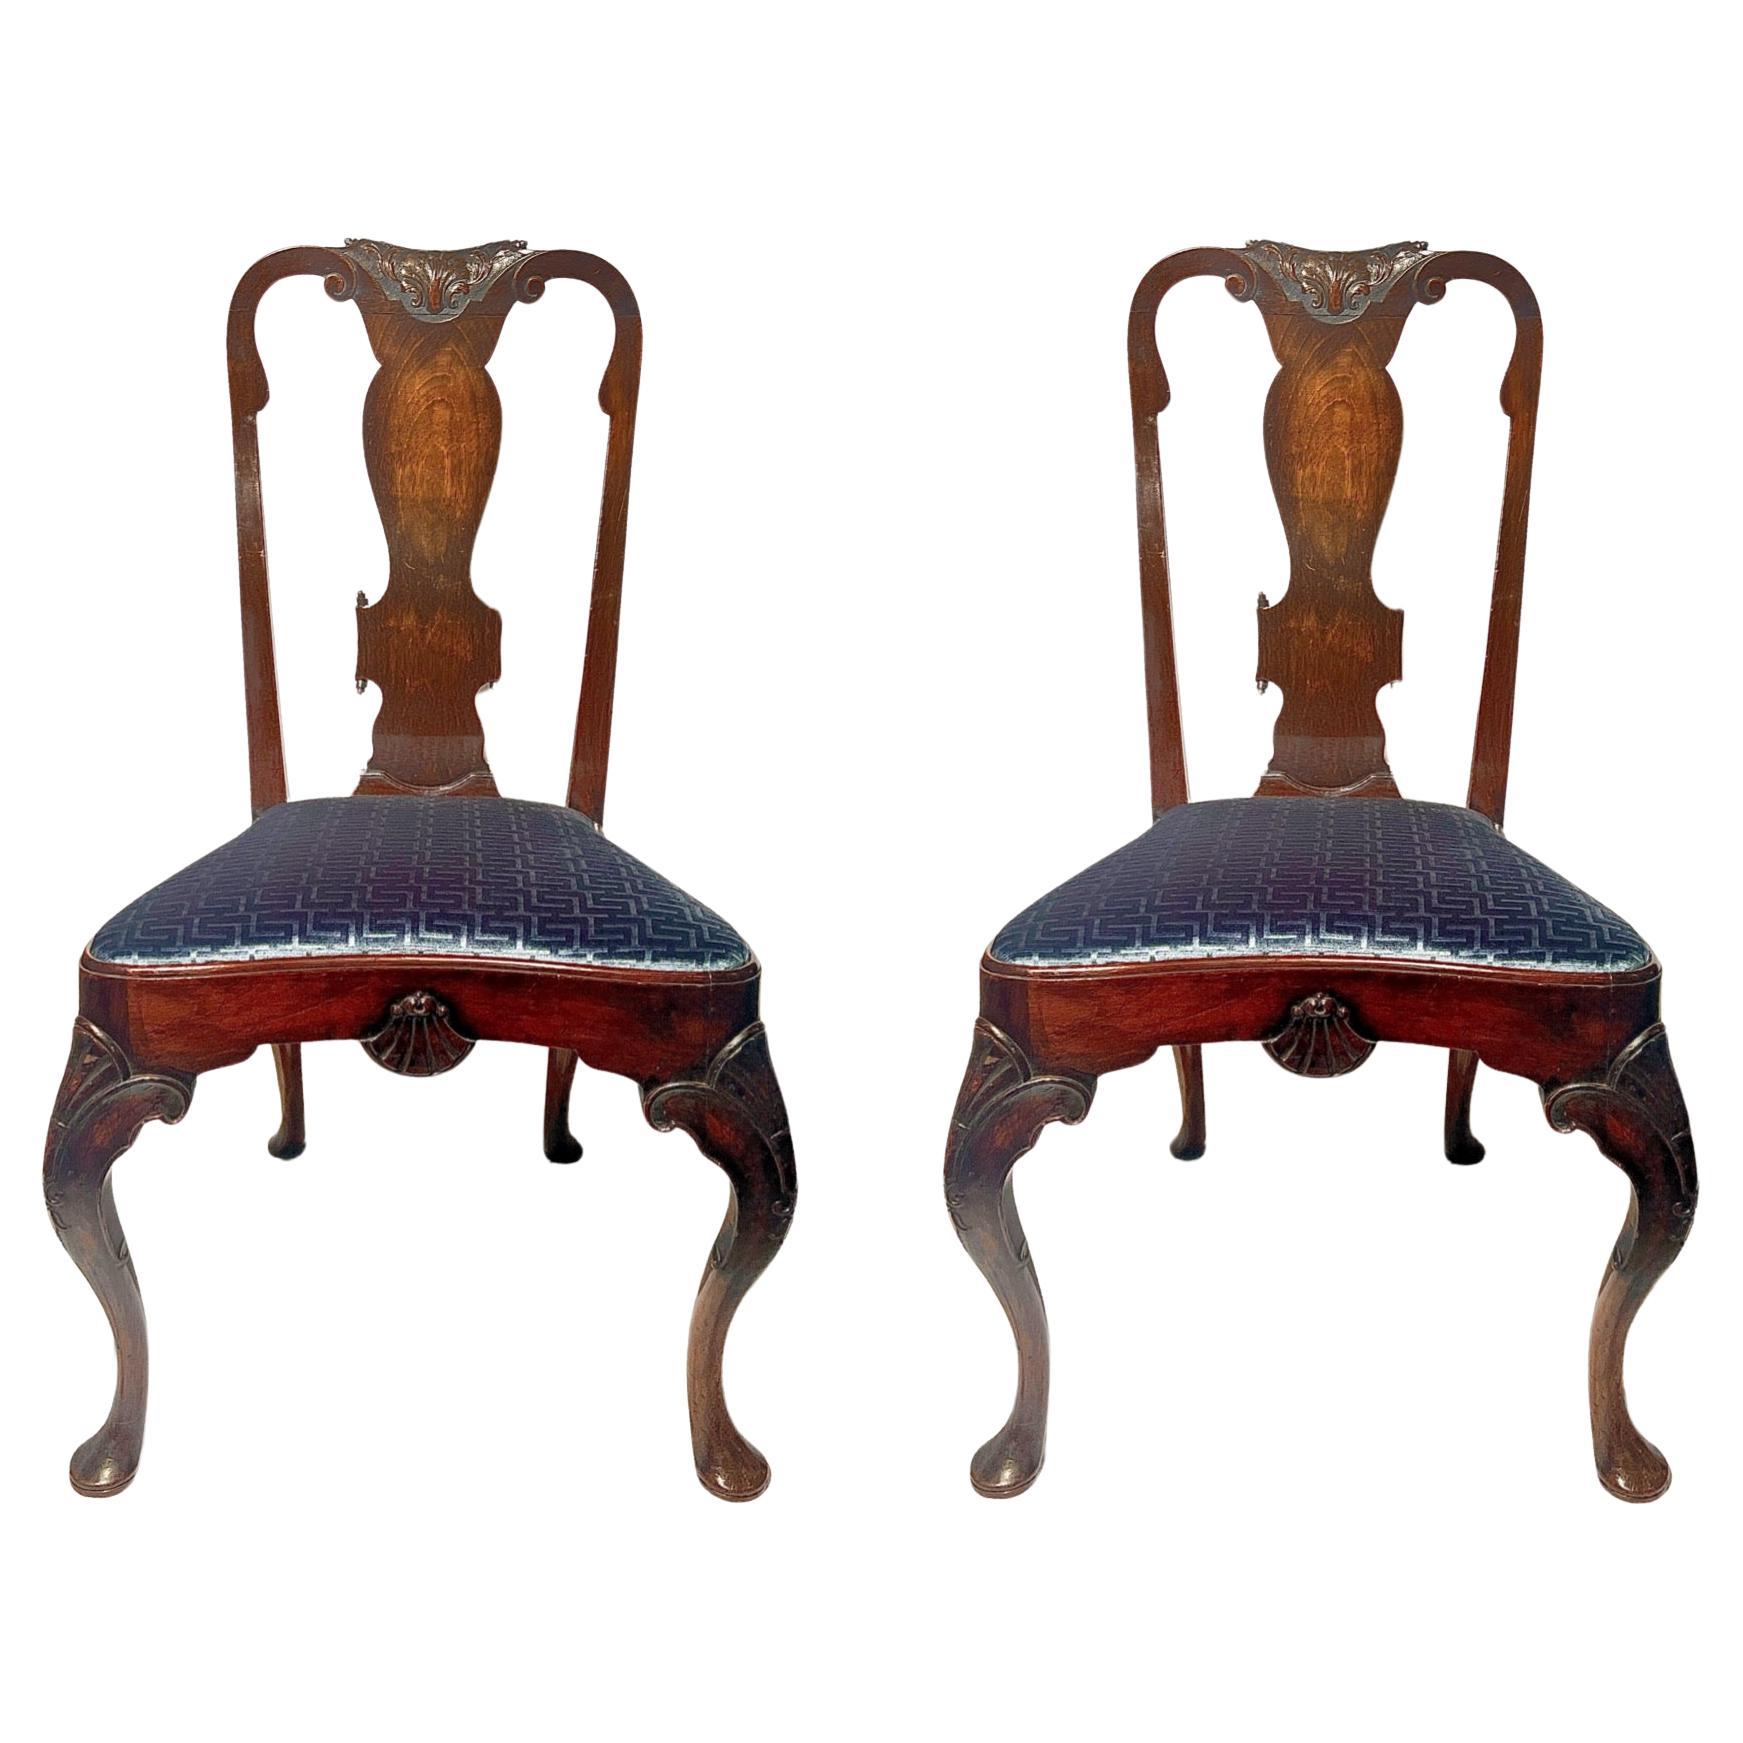 Pair of Antique 19th Century English Queen Anne Burled Walnut Side Chairs. For Sale